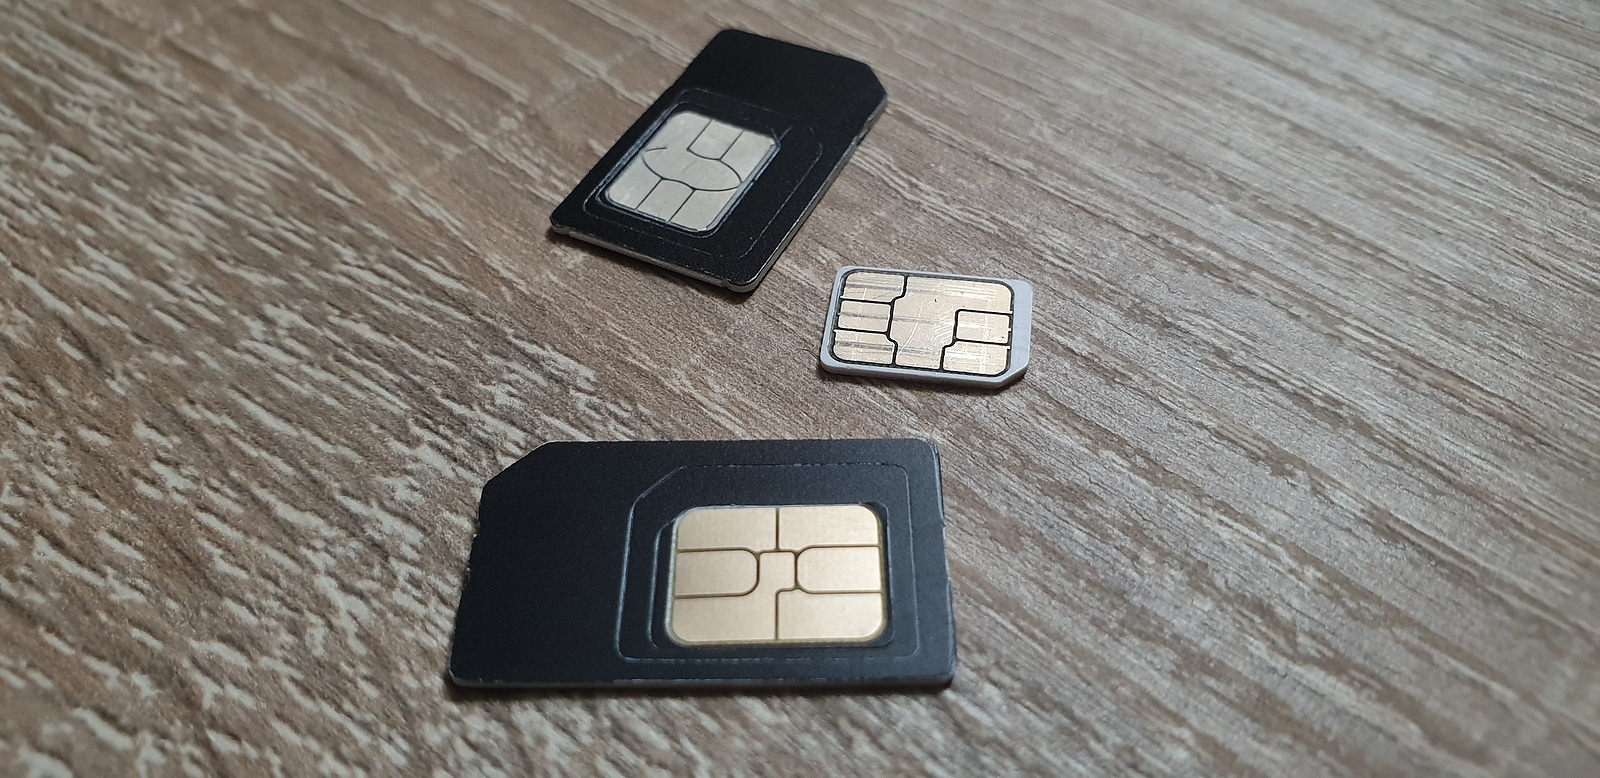 iPhone 14 eSIM: Will the Apple smartphone come without a sim card slot?